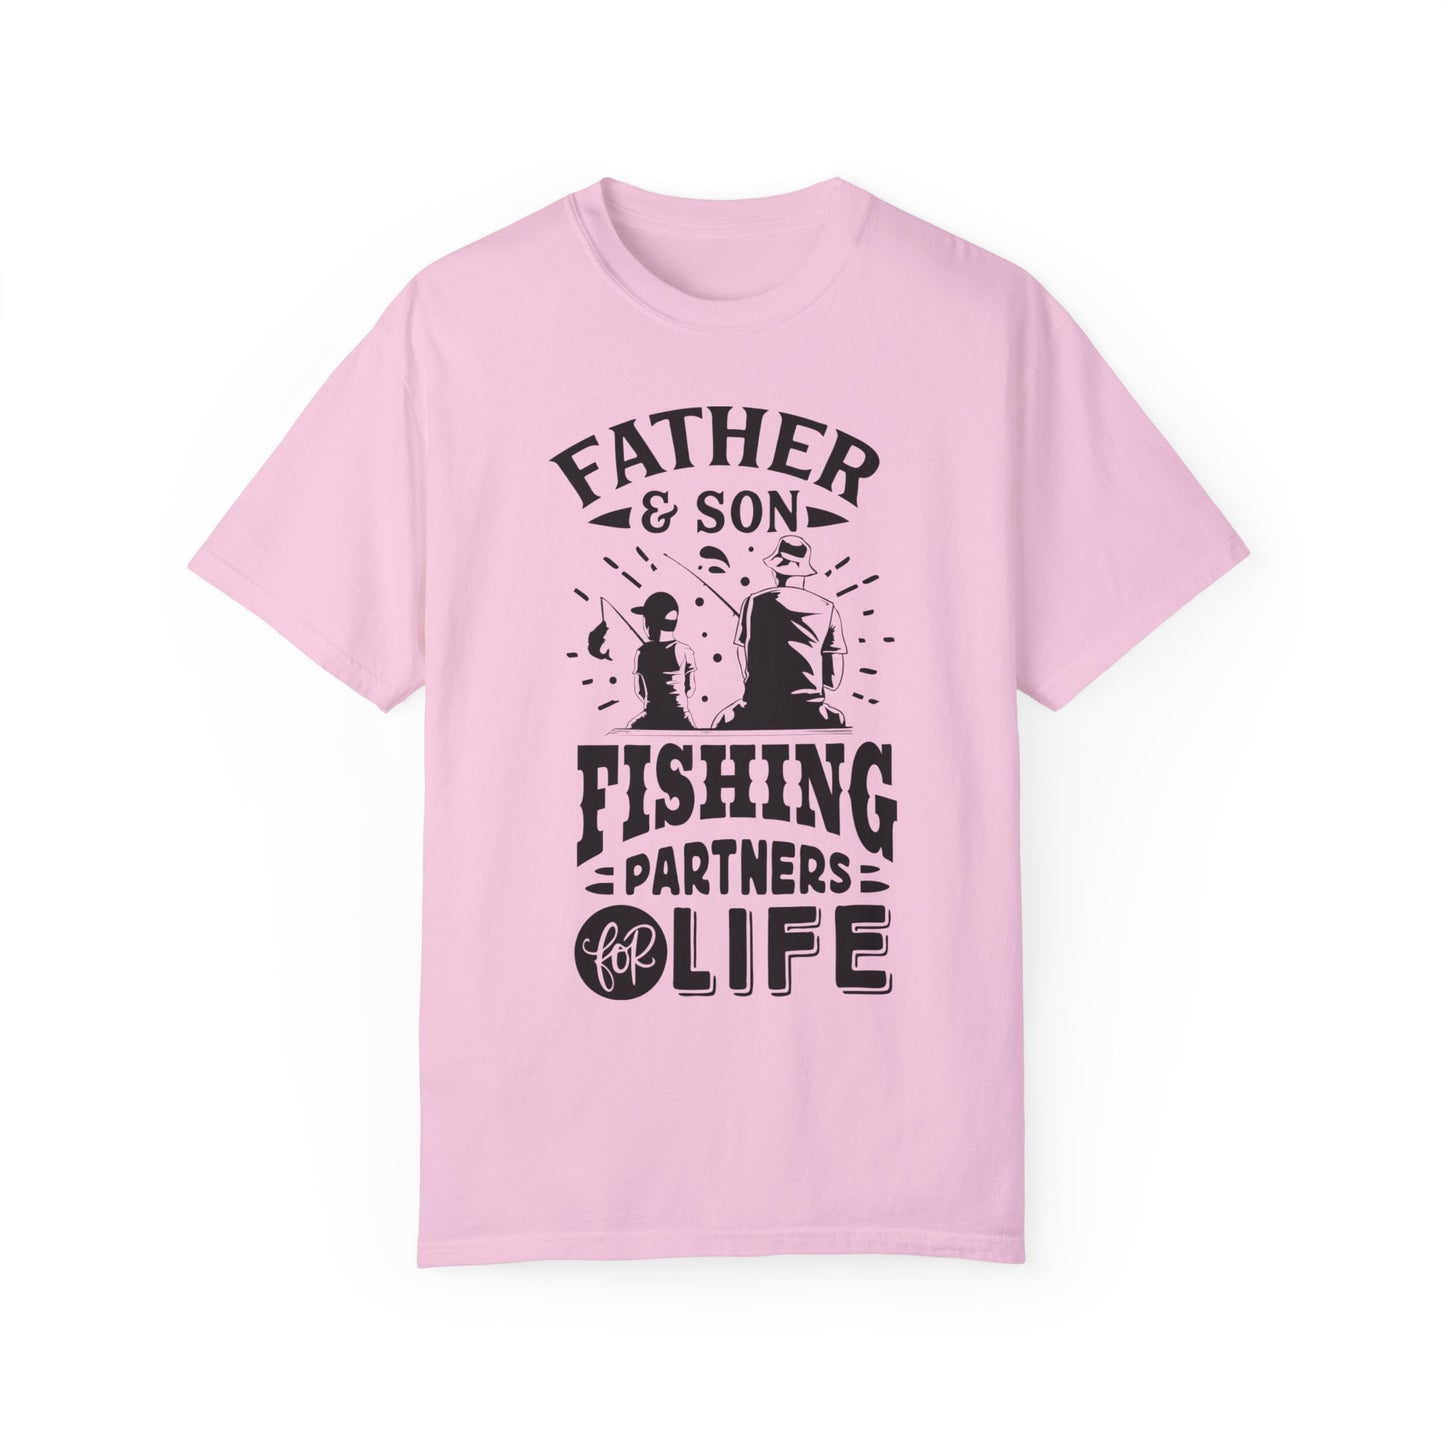 Father and Son forever: Unisex Garment-Dyed T-shirt